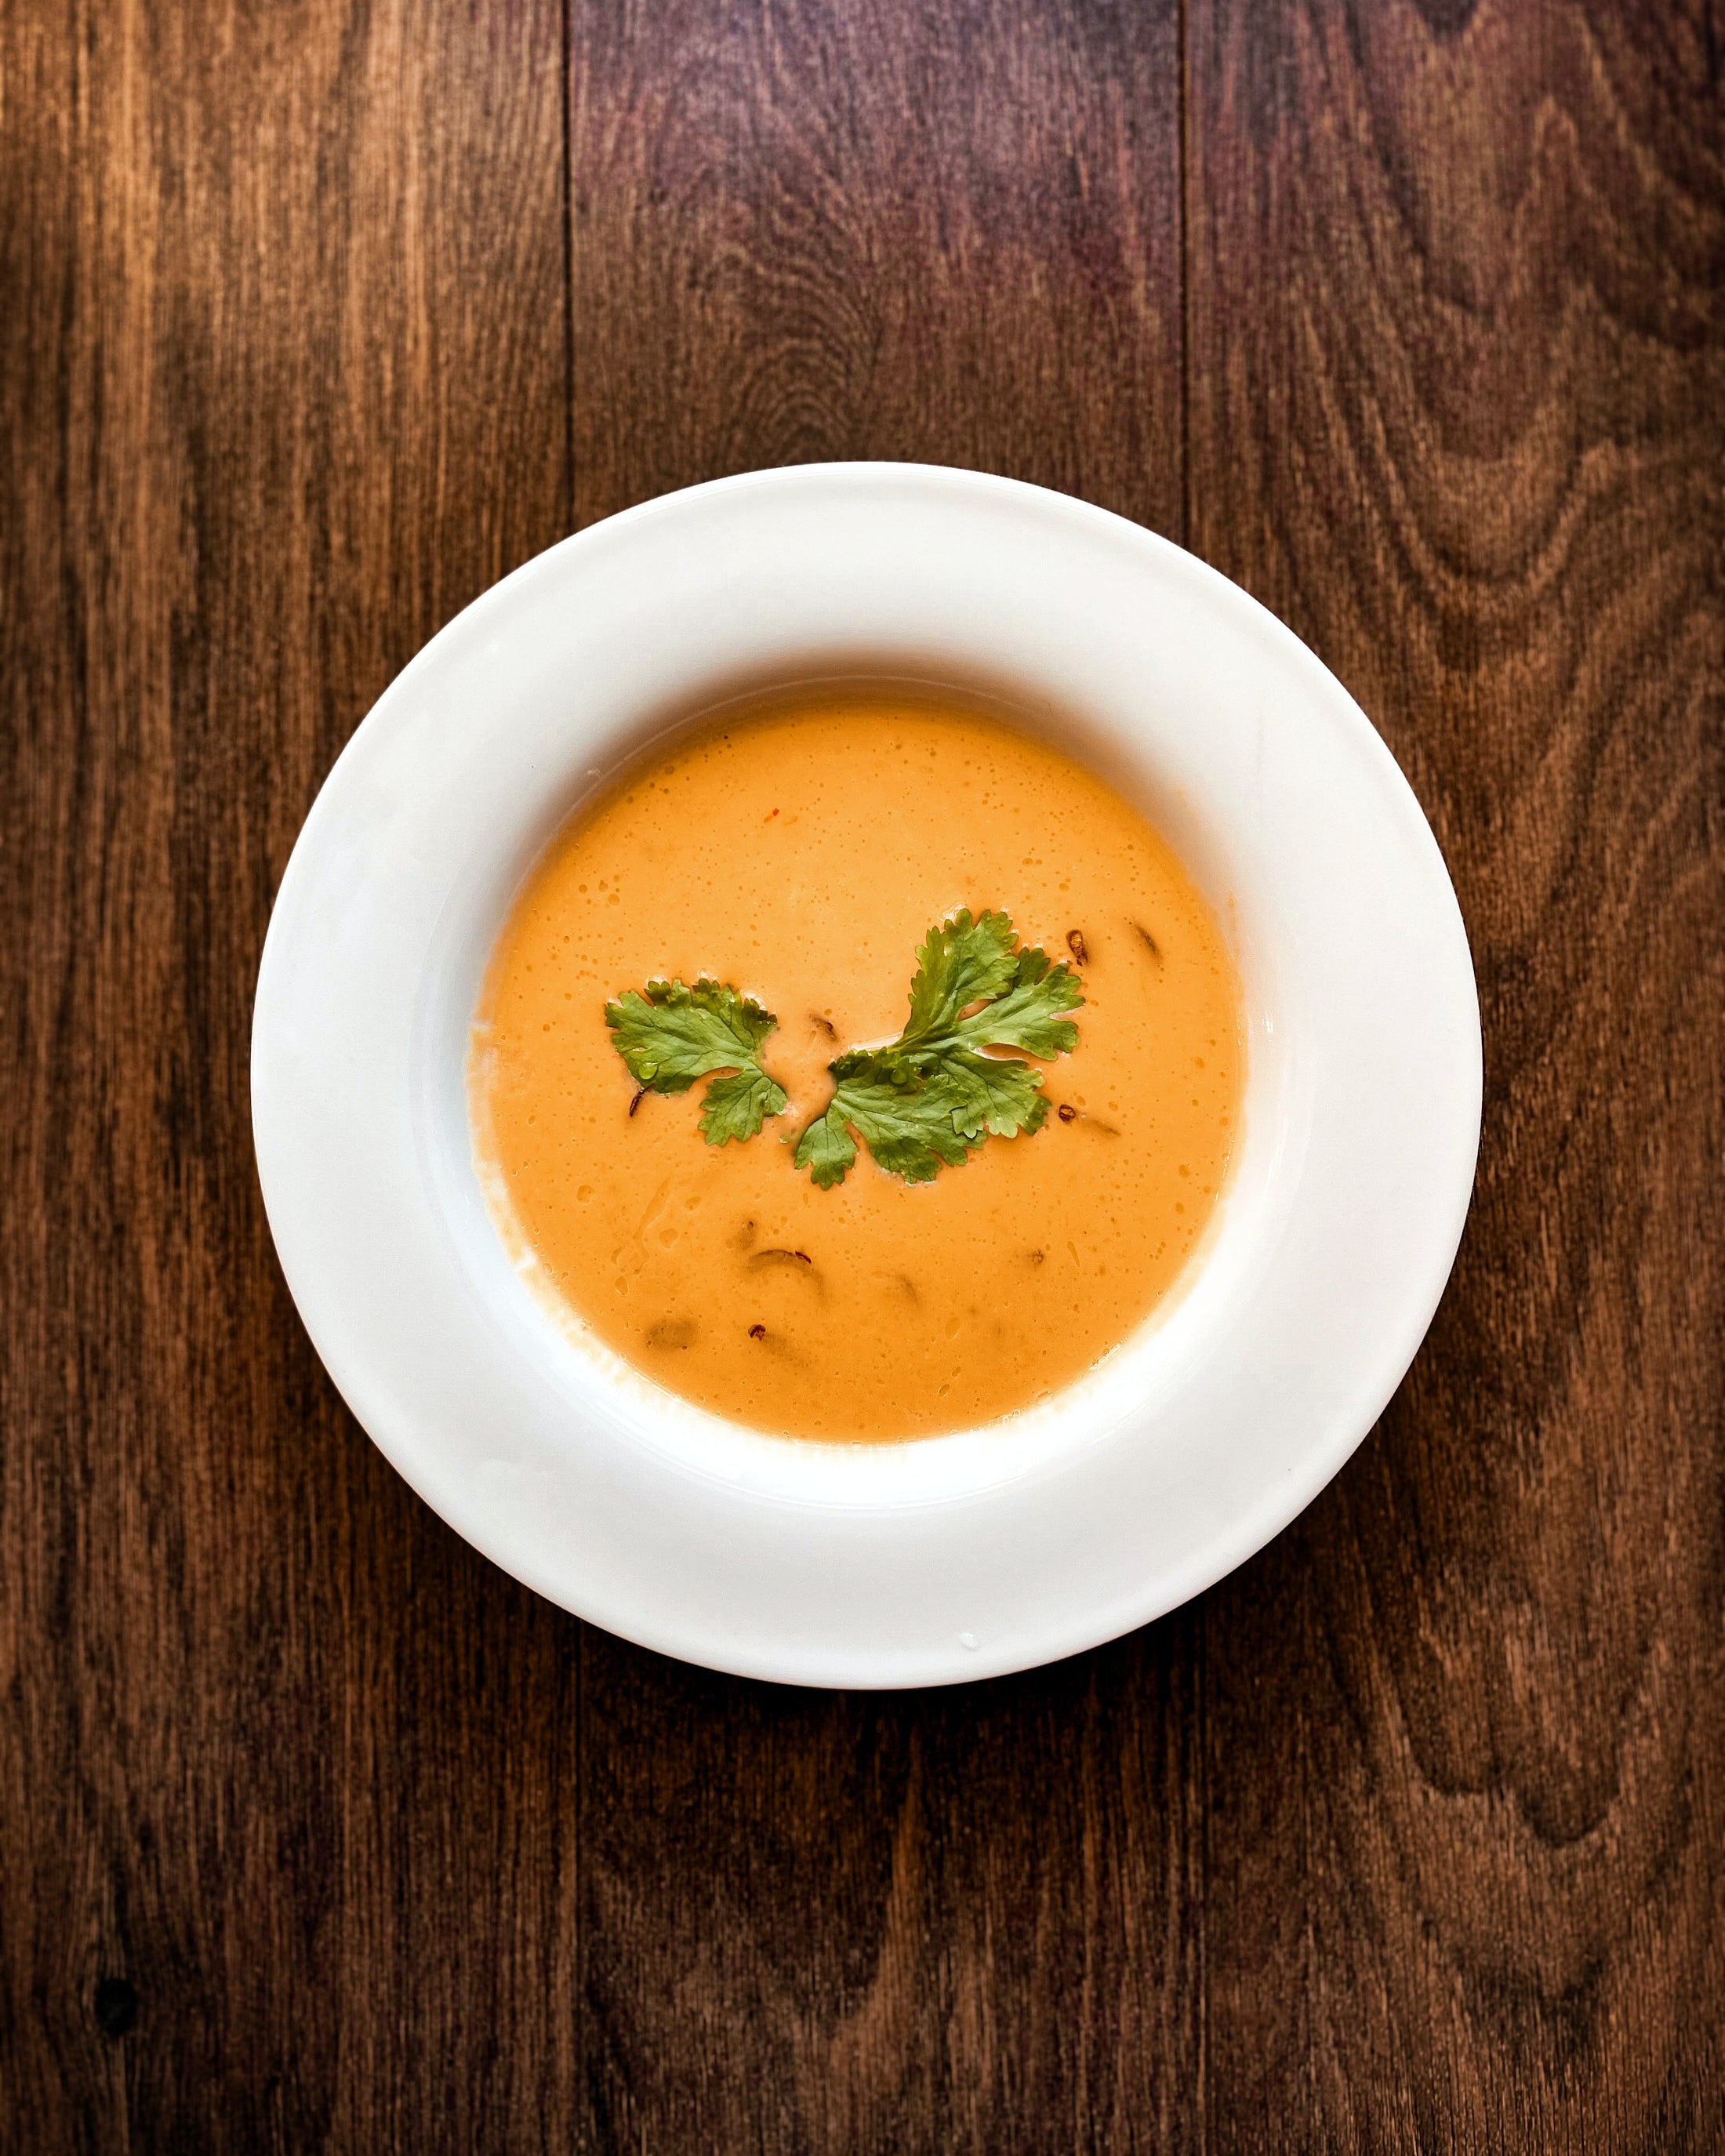 Spiced Carrot and Ginger Soup